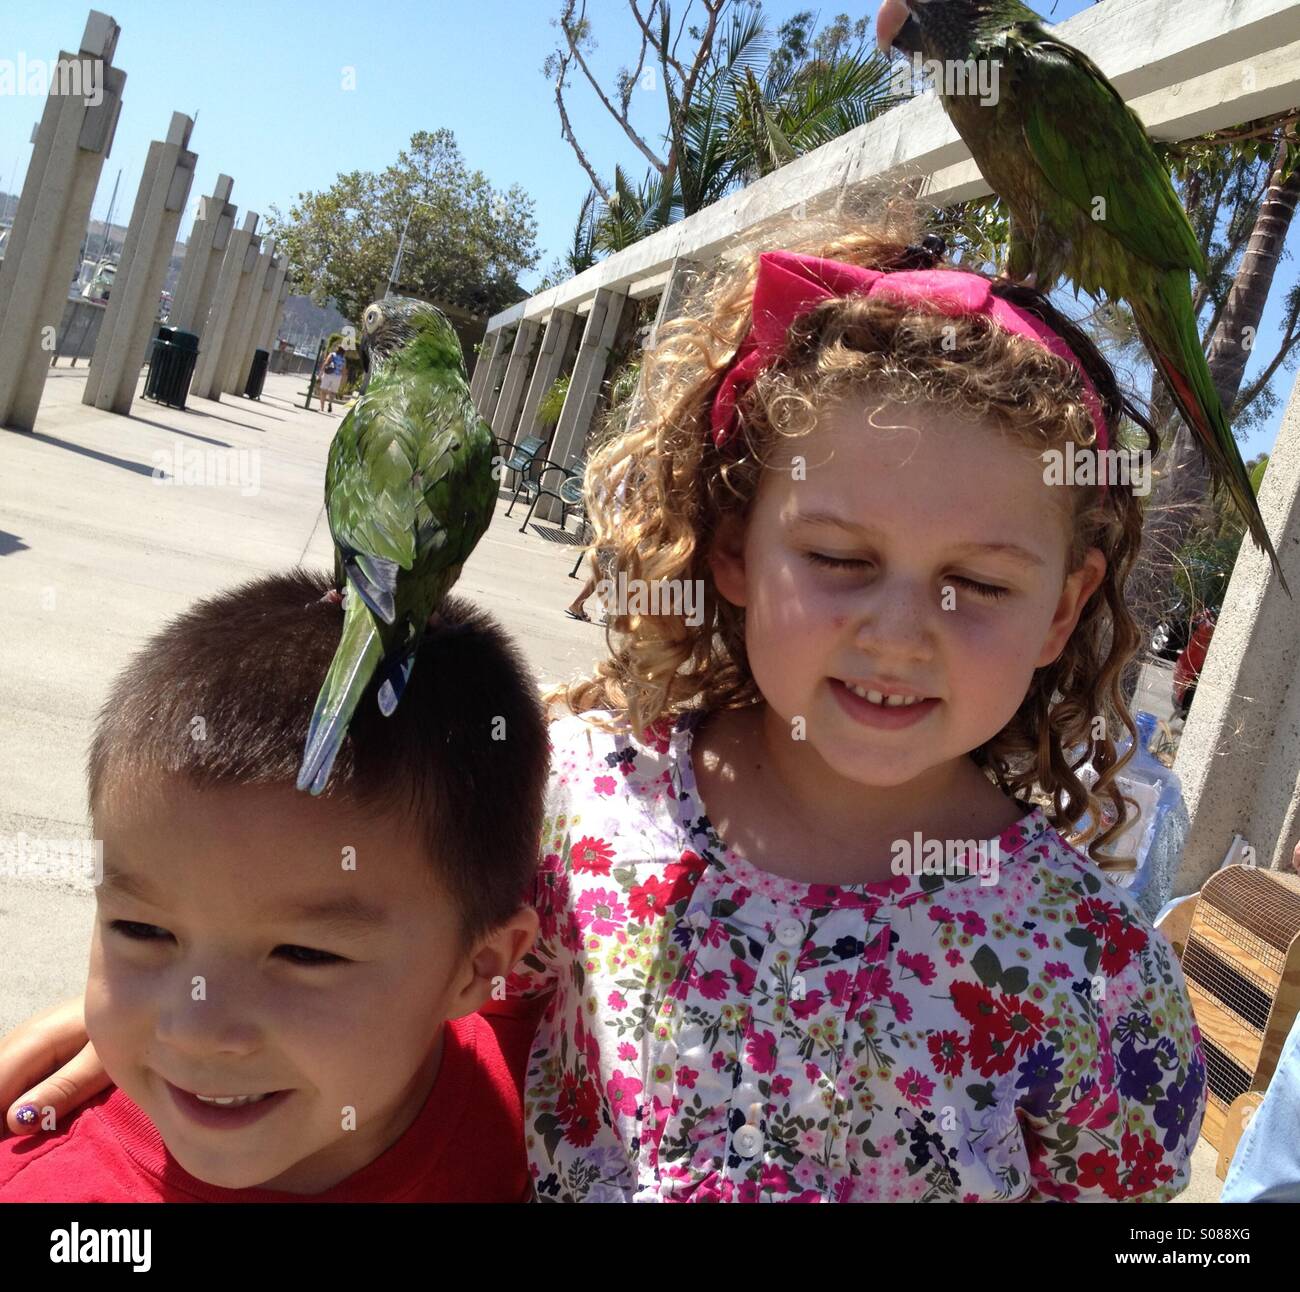 2 kids a girl and a boy with parrots on their heads. Stock Photo